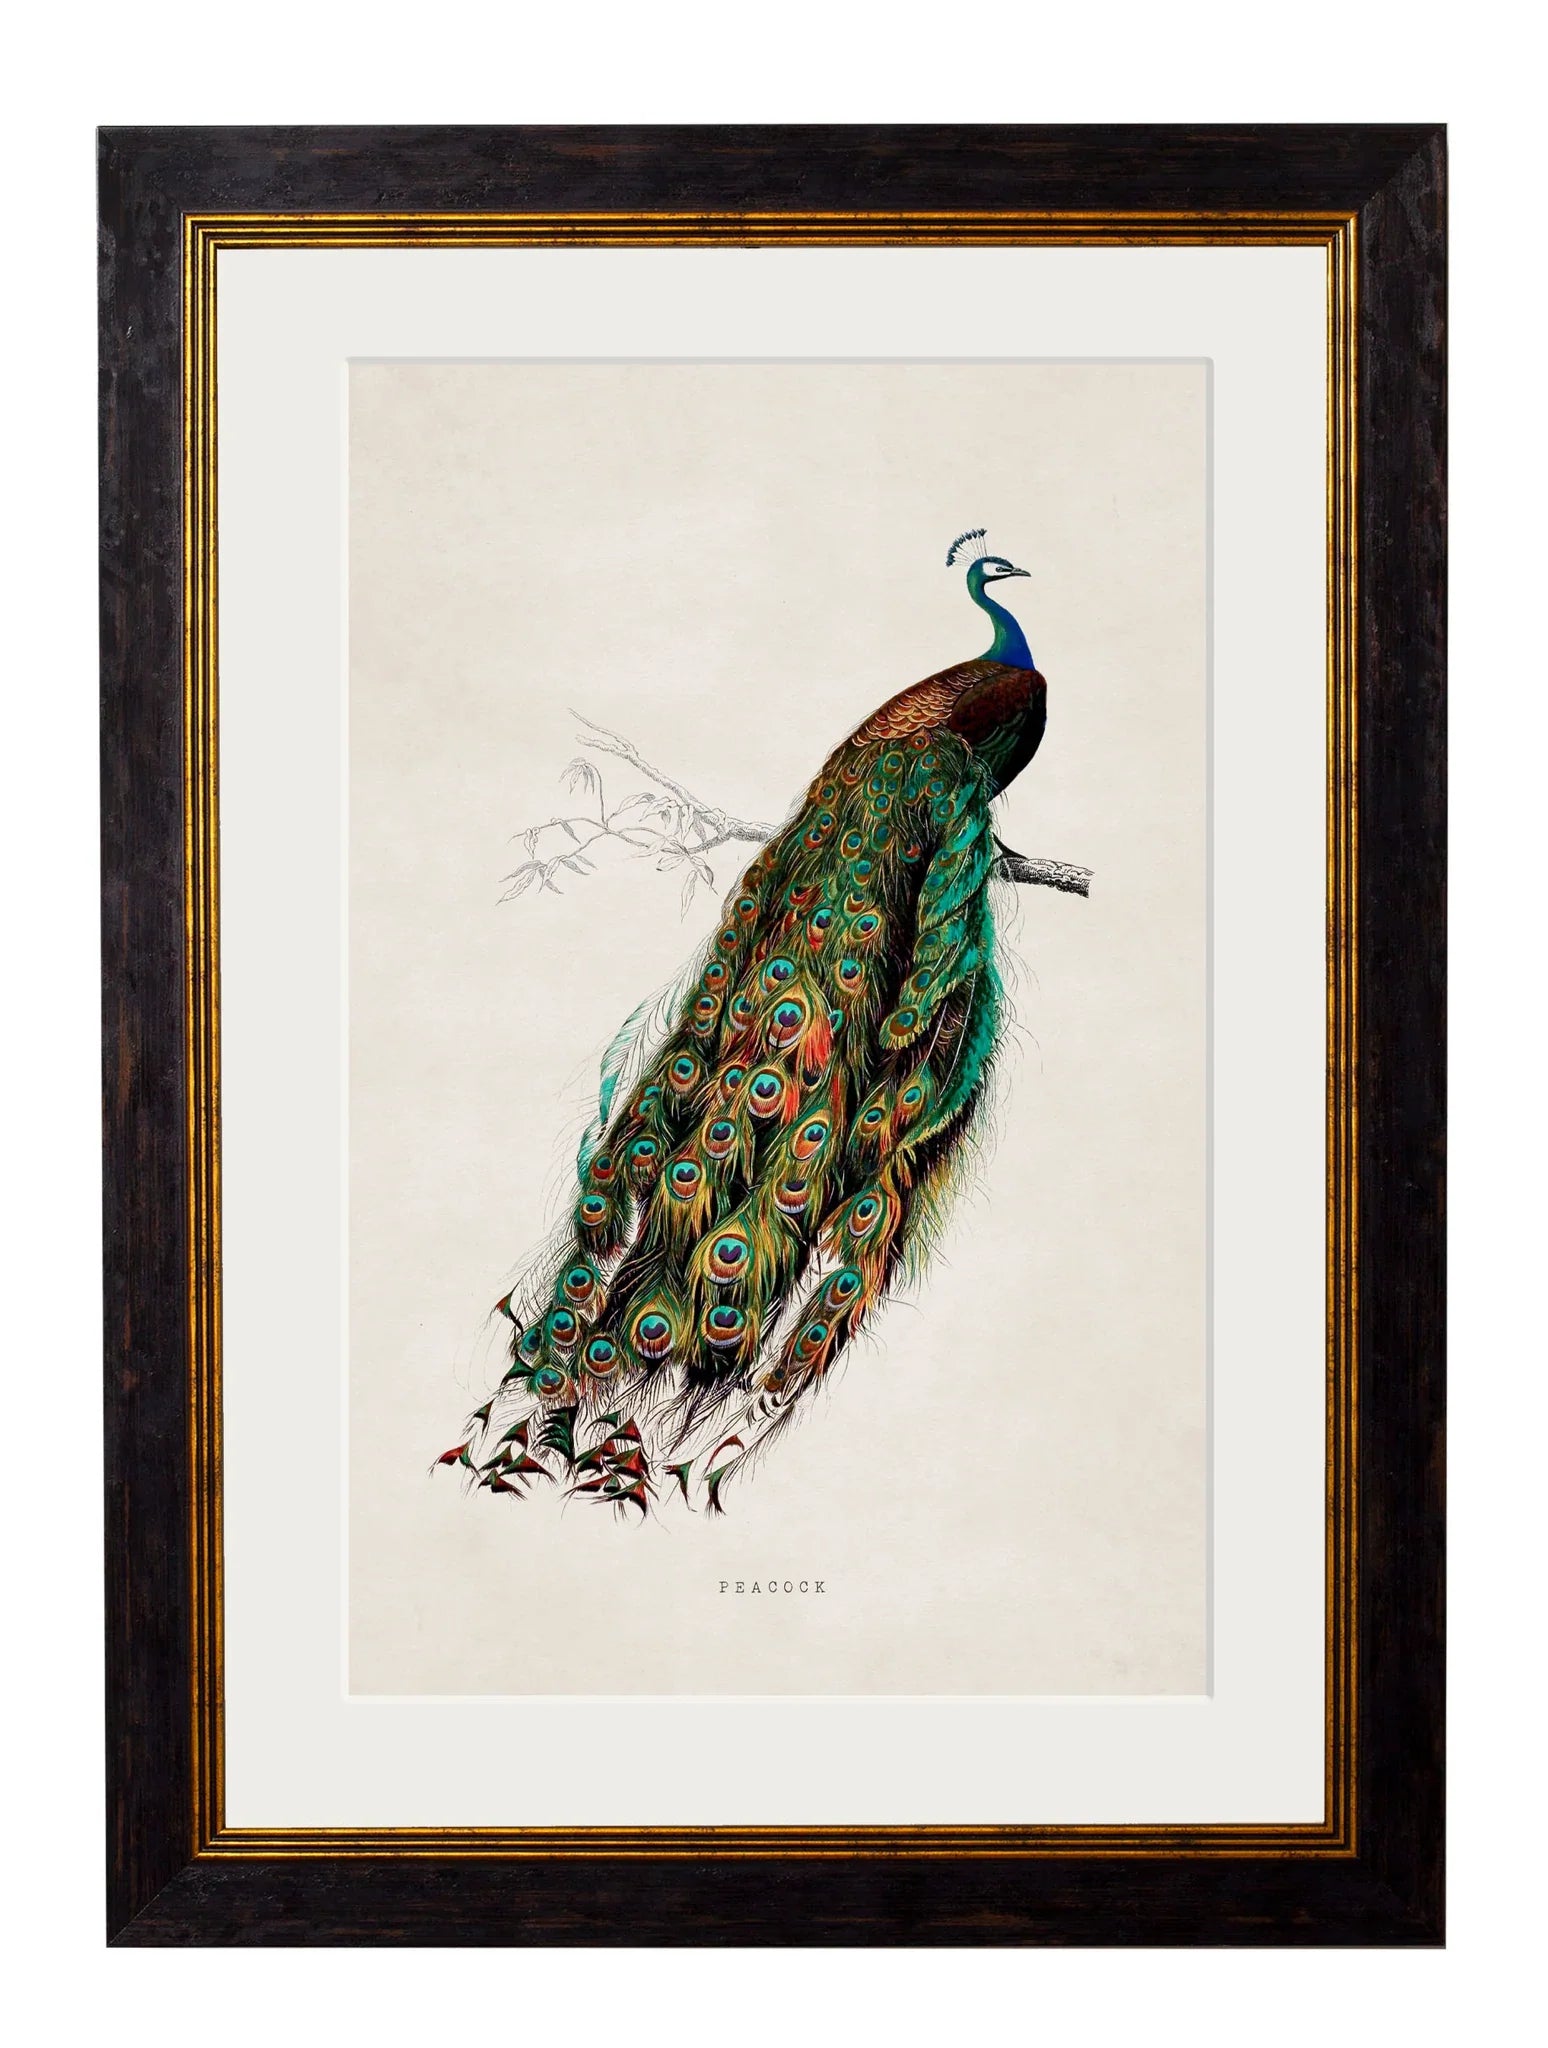 C.1847 Peacock Frame for sale - Woodcock and Cavendish